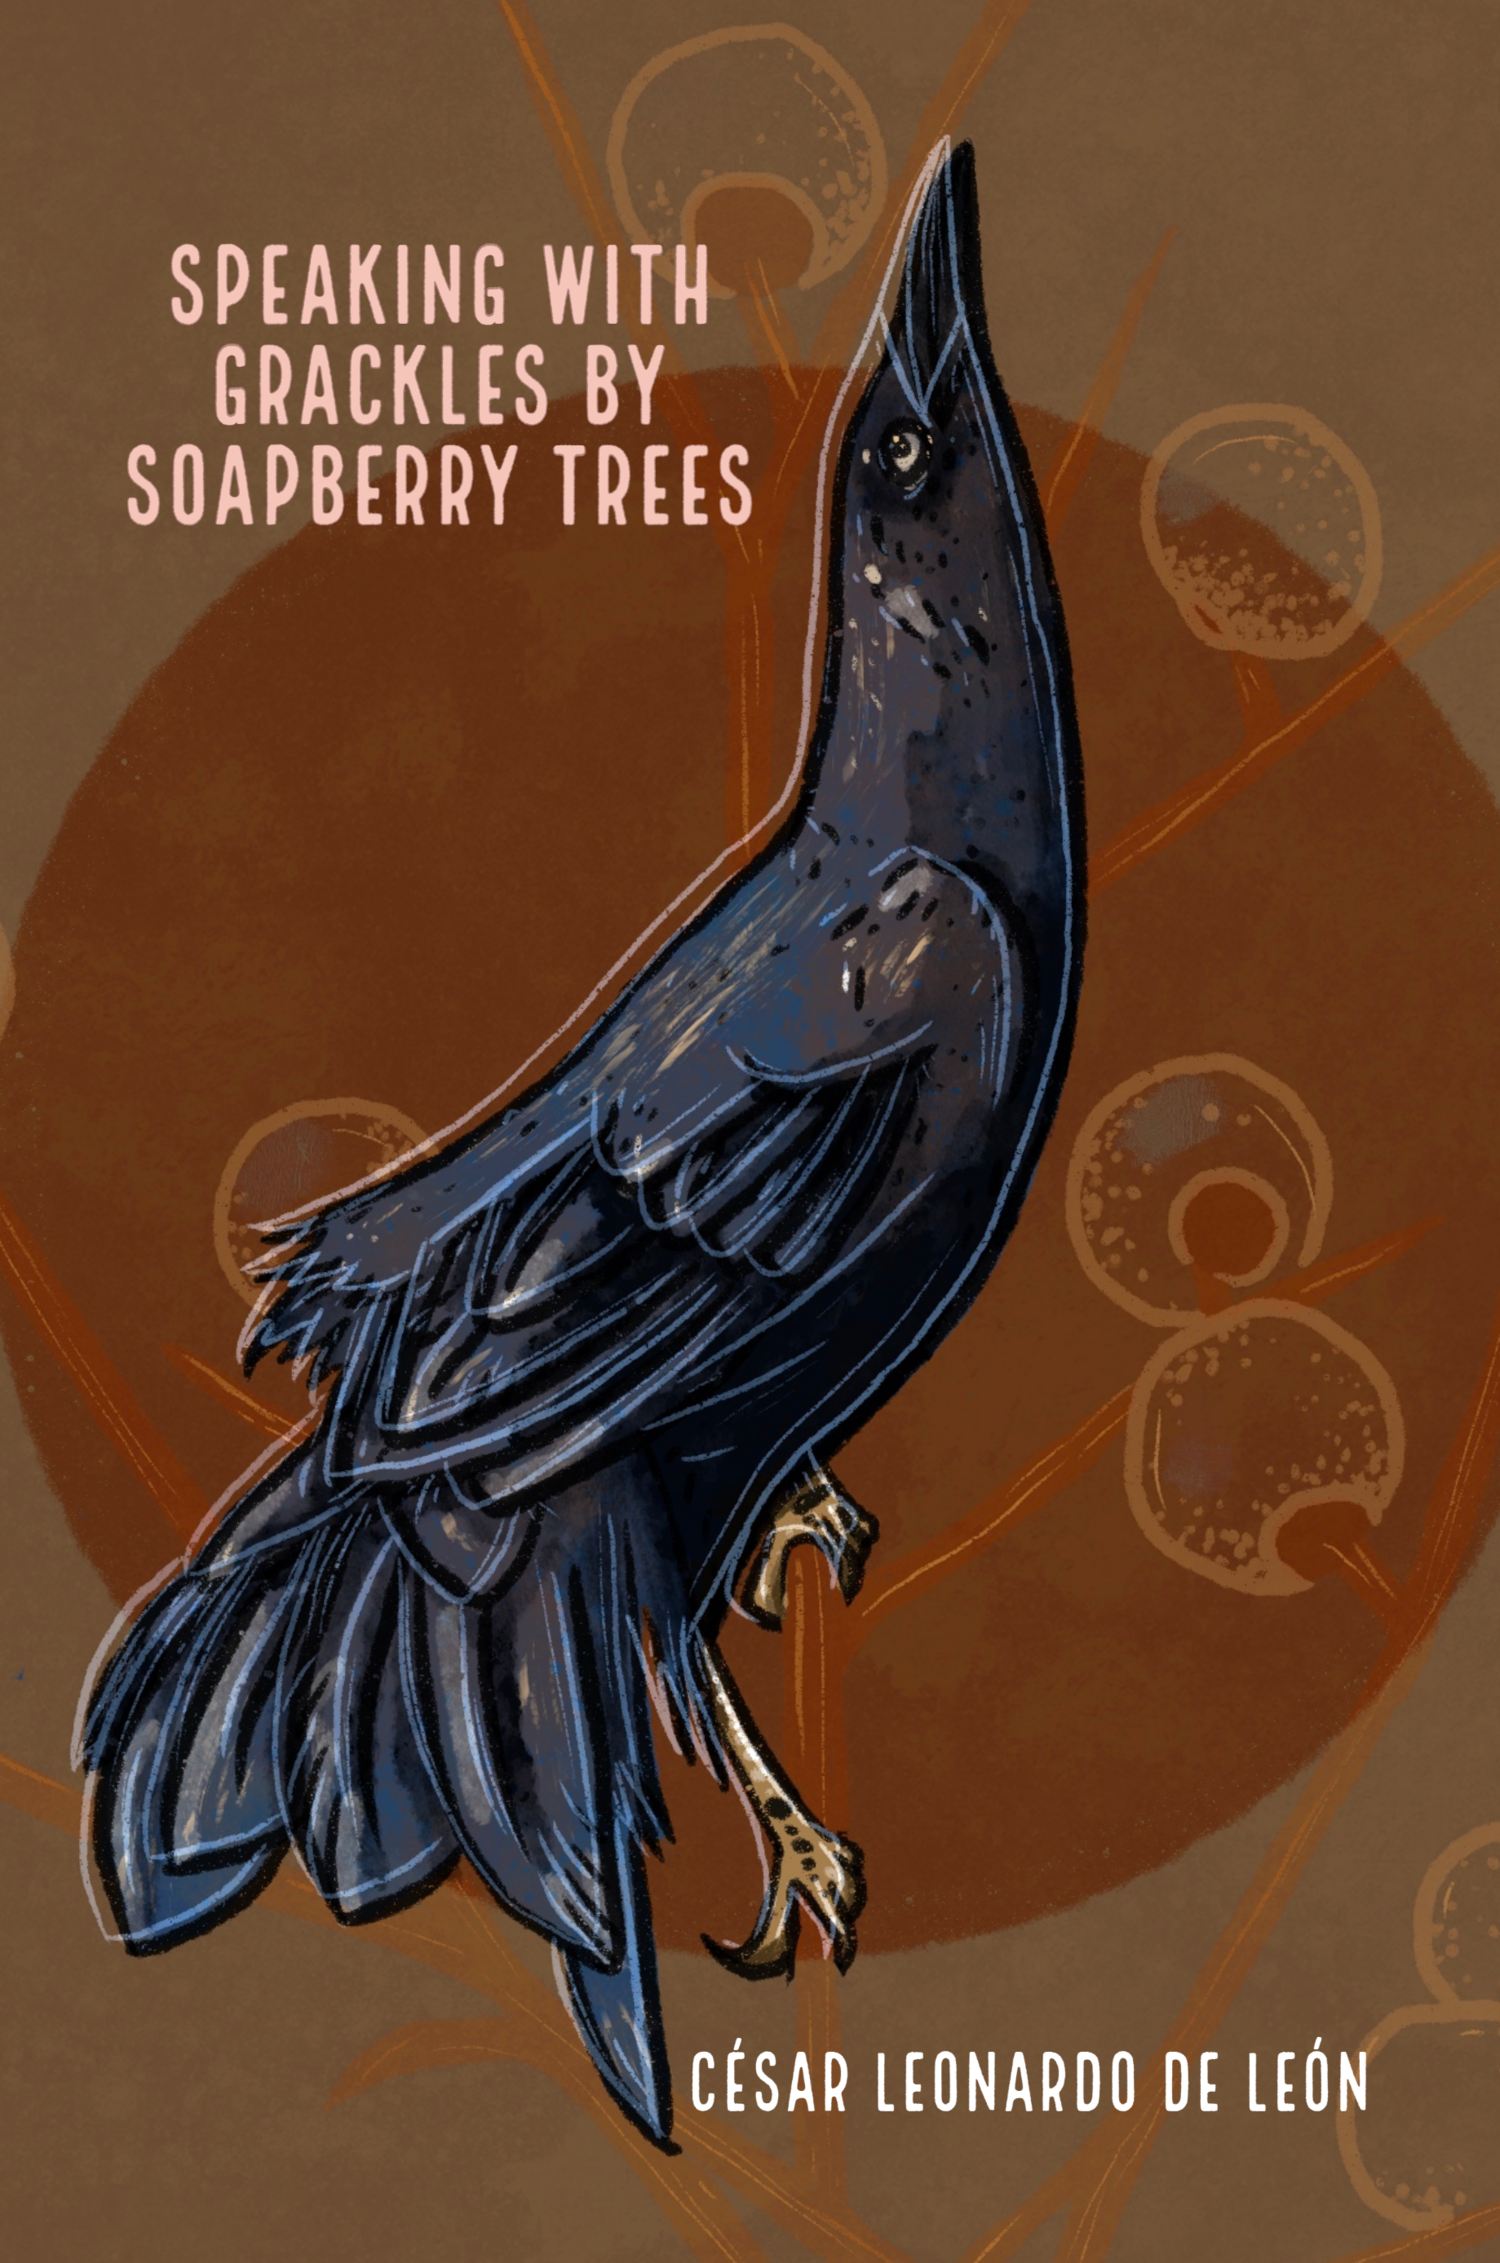 A brown book cover with a drawing of a grackle and the text "Speaking with grackles by soapberry trees"